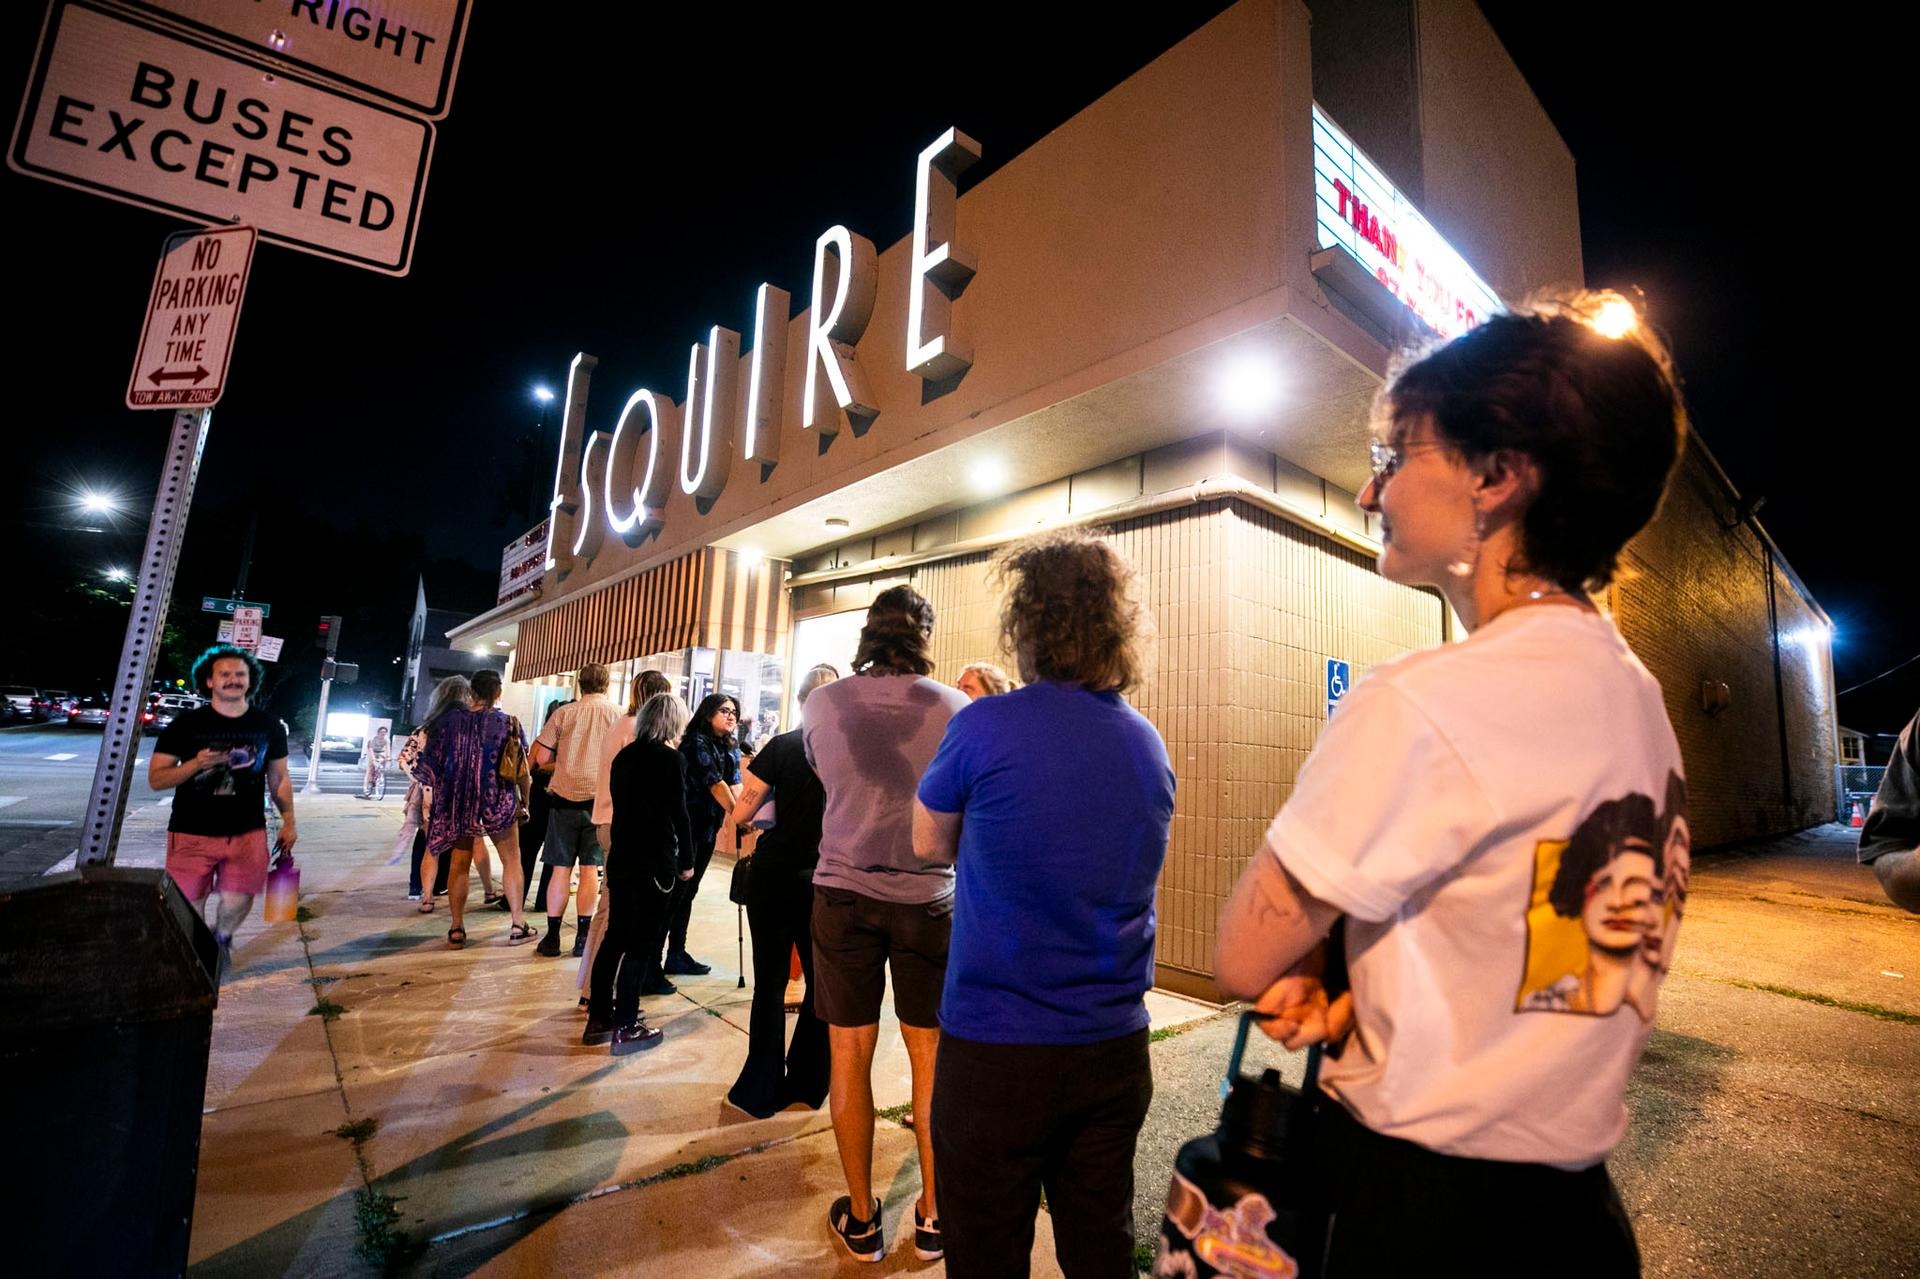 People wait in a long line outside the Landmark Esquire Theatre to see “2001: A Space Odyssey” during the last weekend before the theatre's closure.